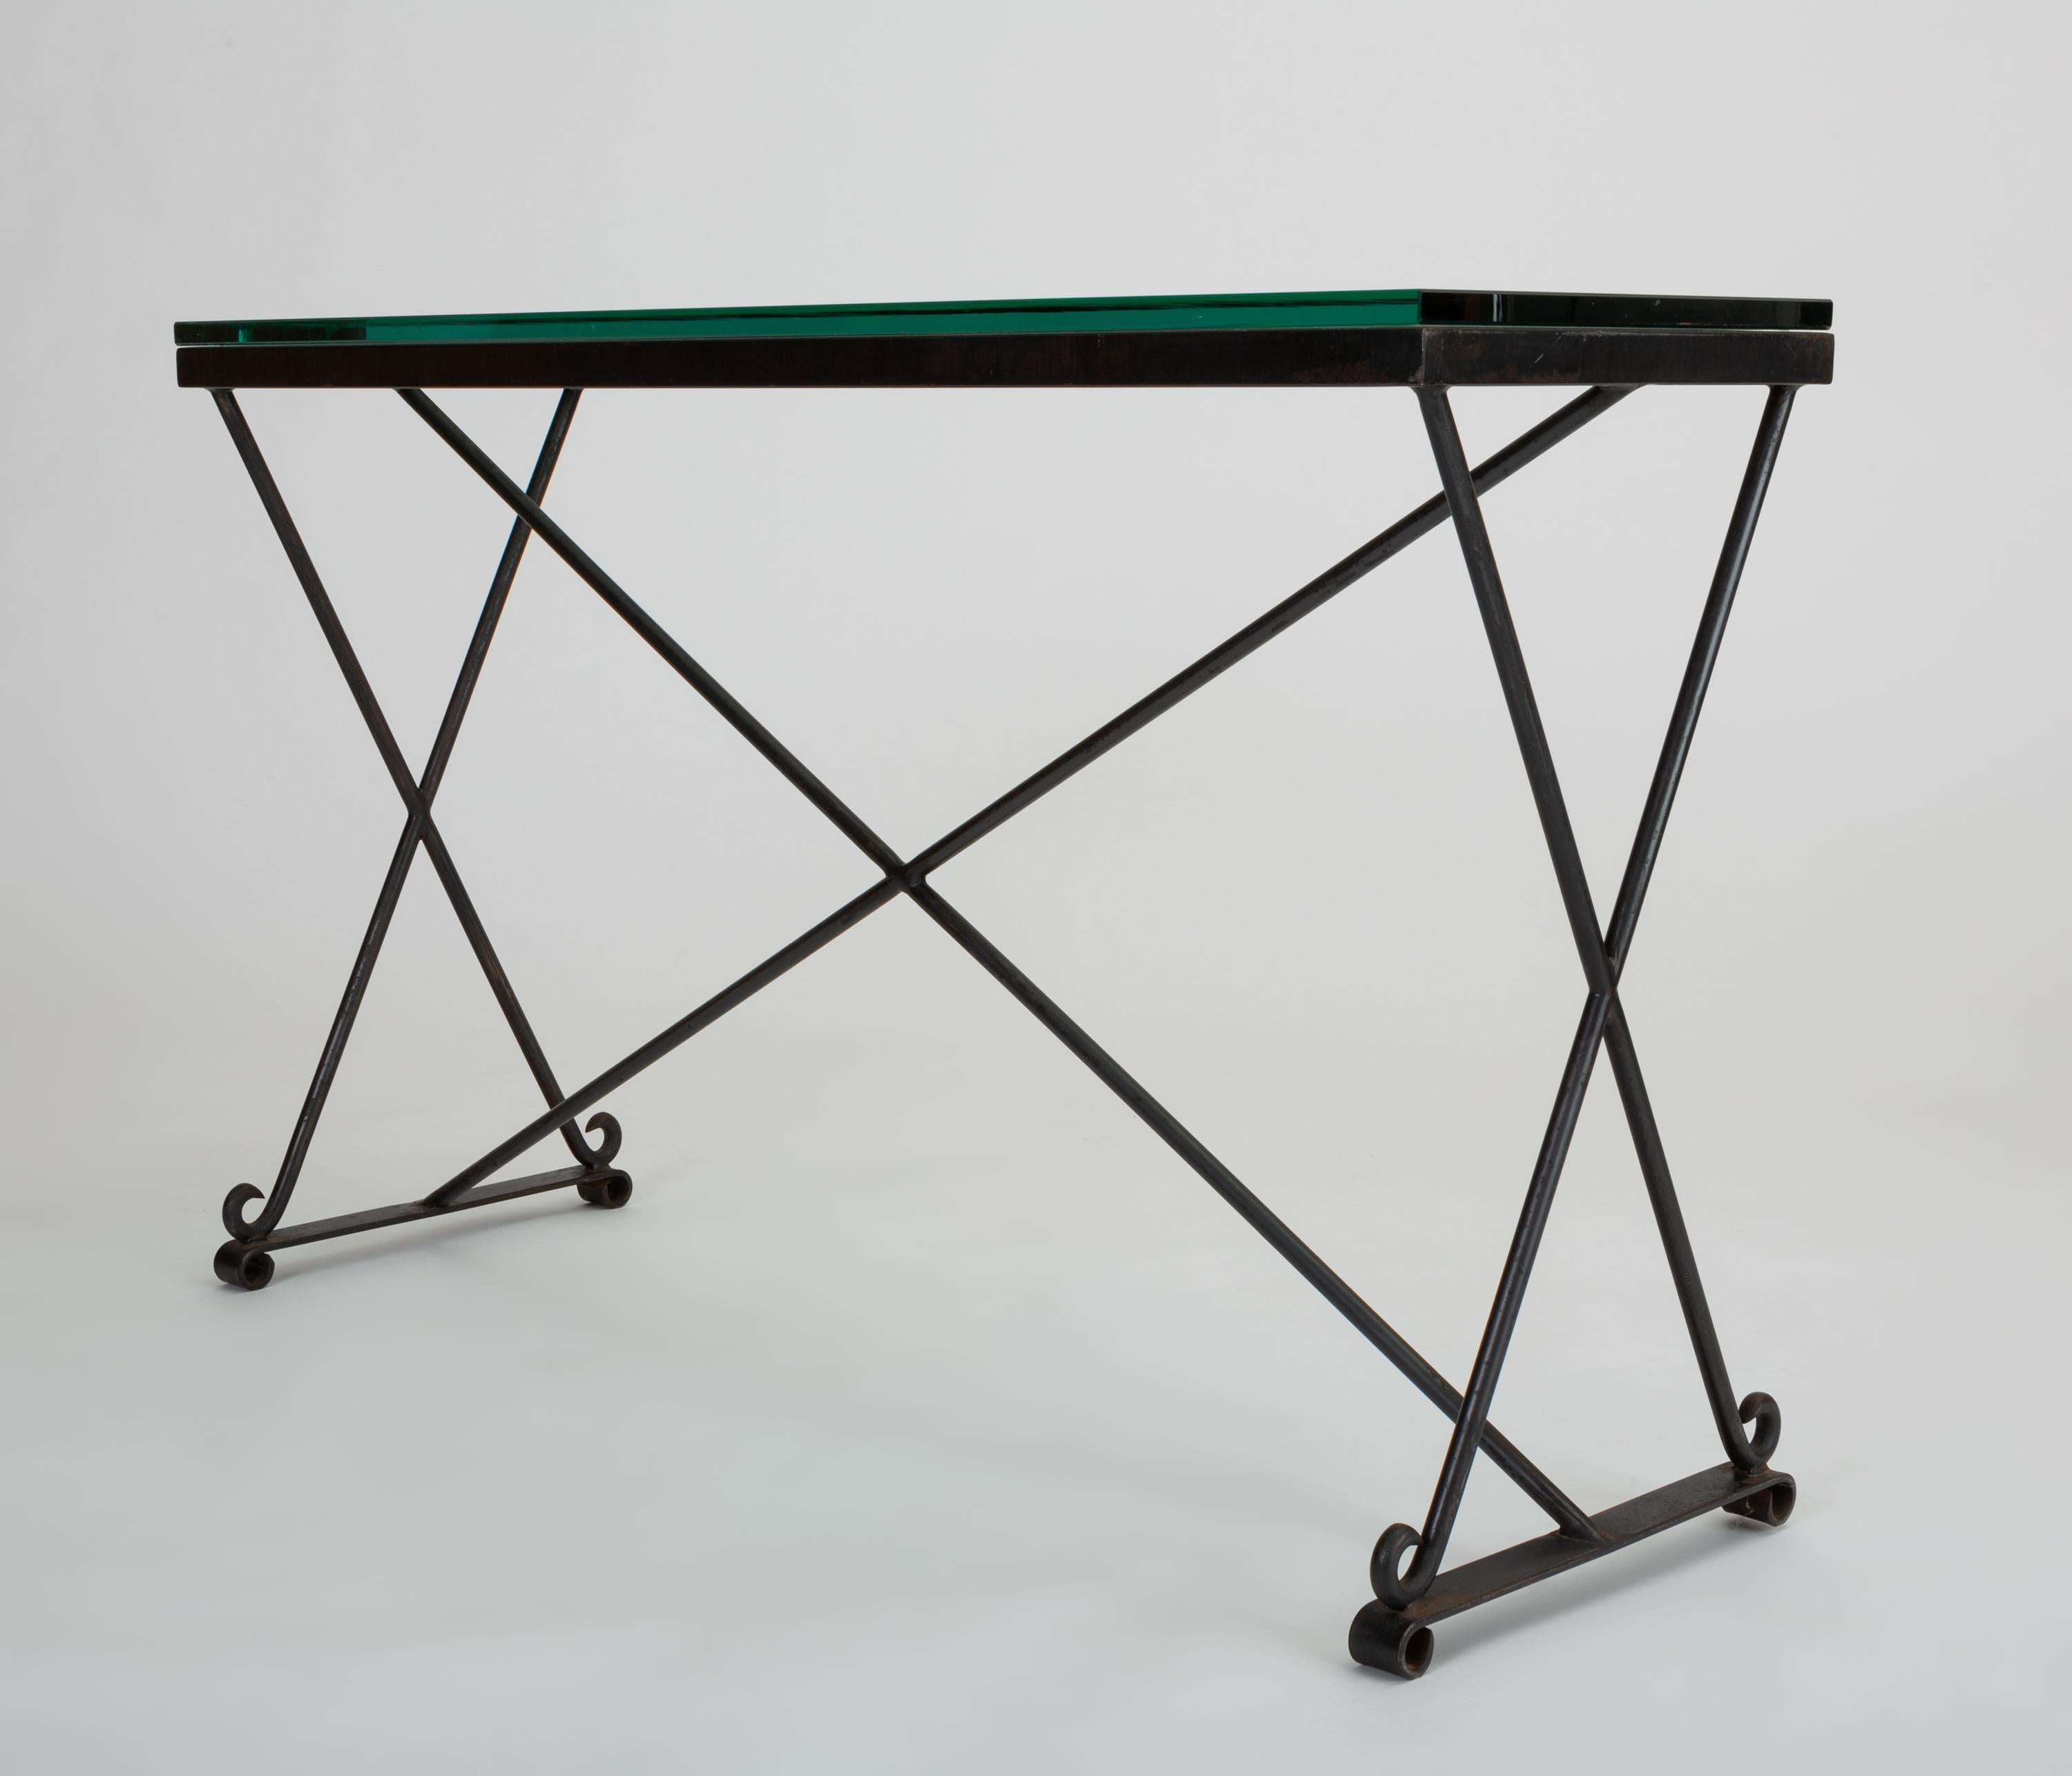 A midcentury wrought iron console table with subtle decorative elements. The versatile piece has a wire frame with trestle legs and an X-shaped center brace. Each segment terminates in a curlicue of tapered iron. The tabletop is thick-cut-glass.